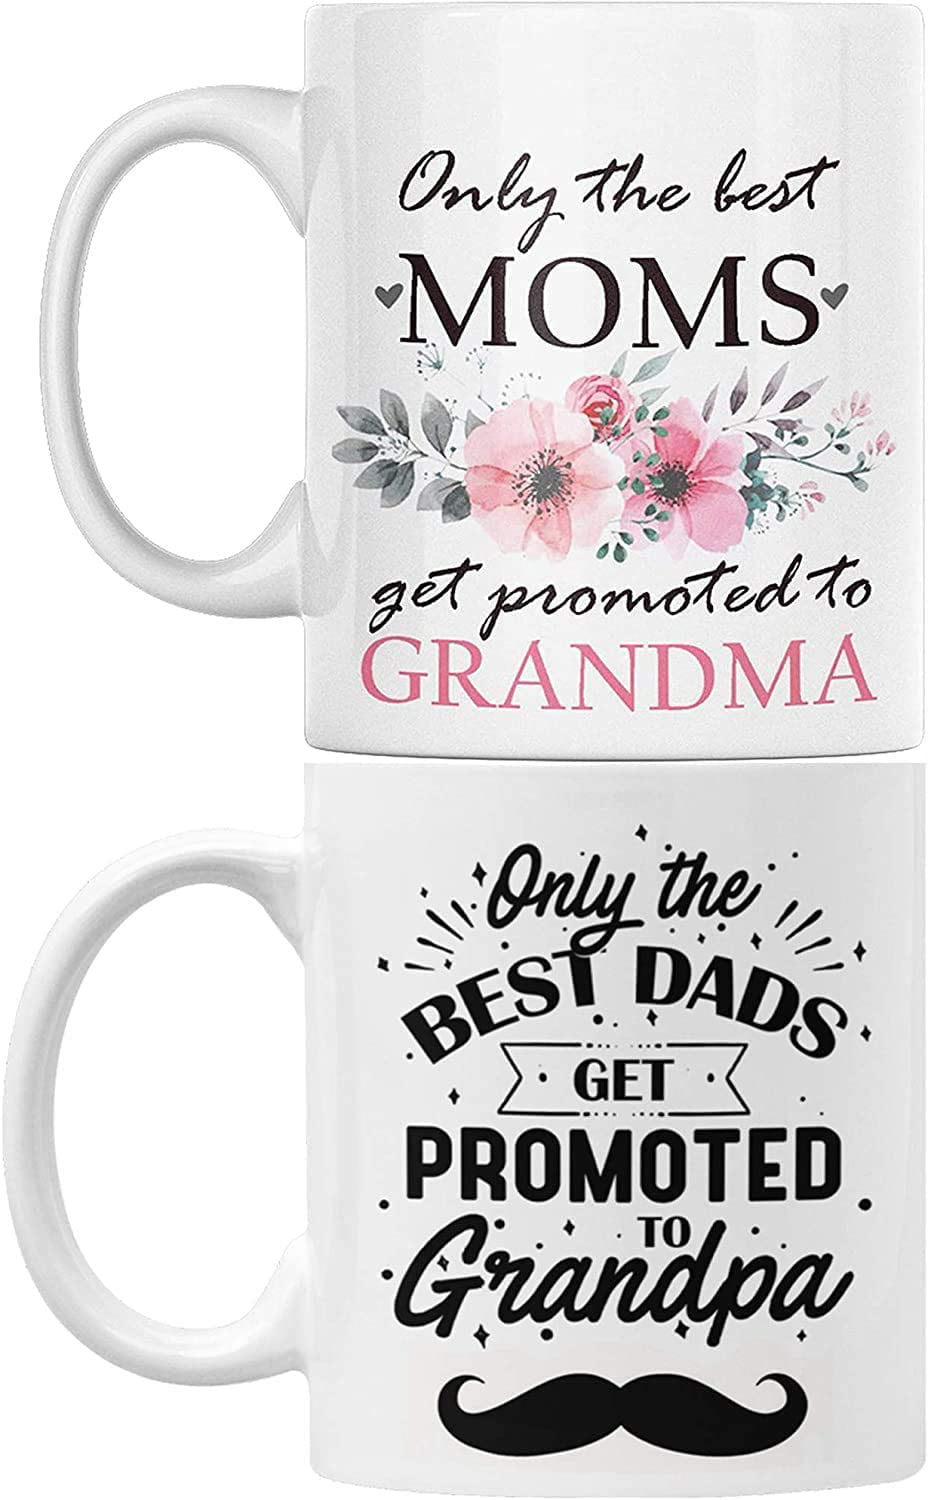 Best Present Your Mom Could Ever Receive When Shes Promoted to Grandma! First Time Grandma Coffee Mug A Funny Travel Mug Makes the Best Grandparent Announcement Gift for Any Future Grandma 